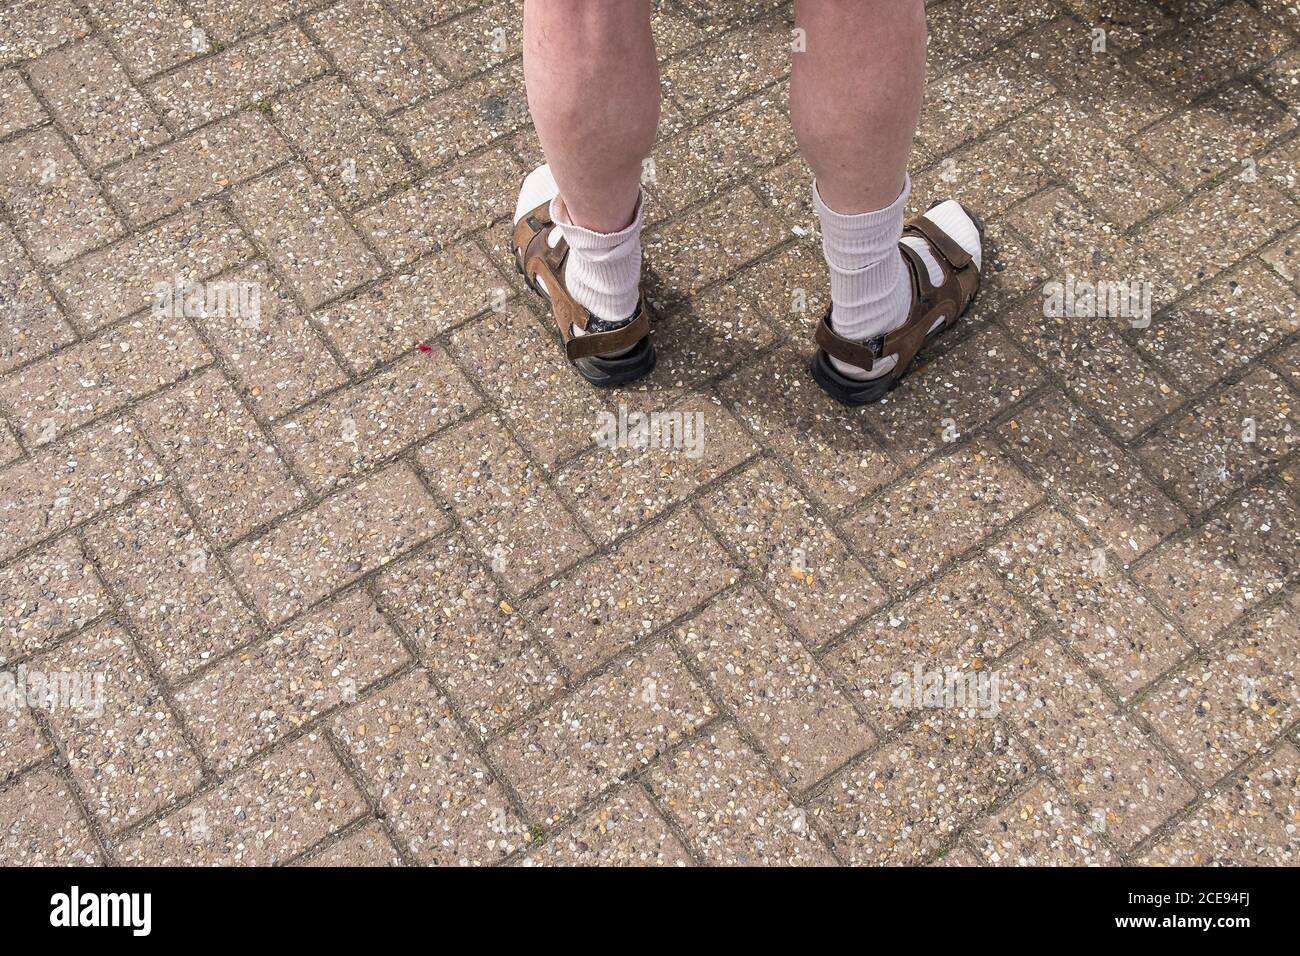 The legs of a man wearing socks and sandals. Stock Photo